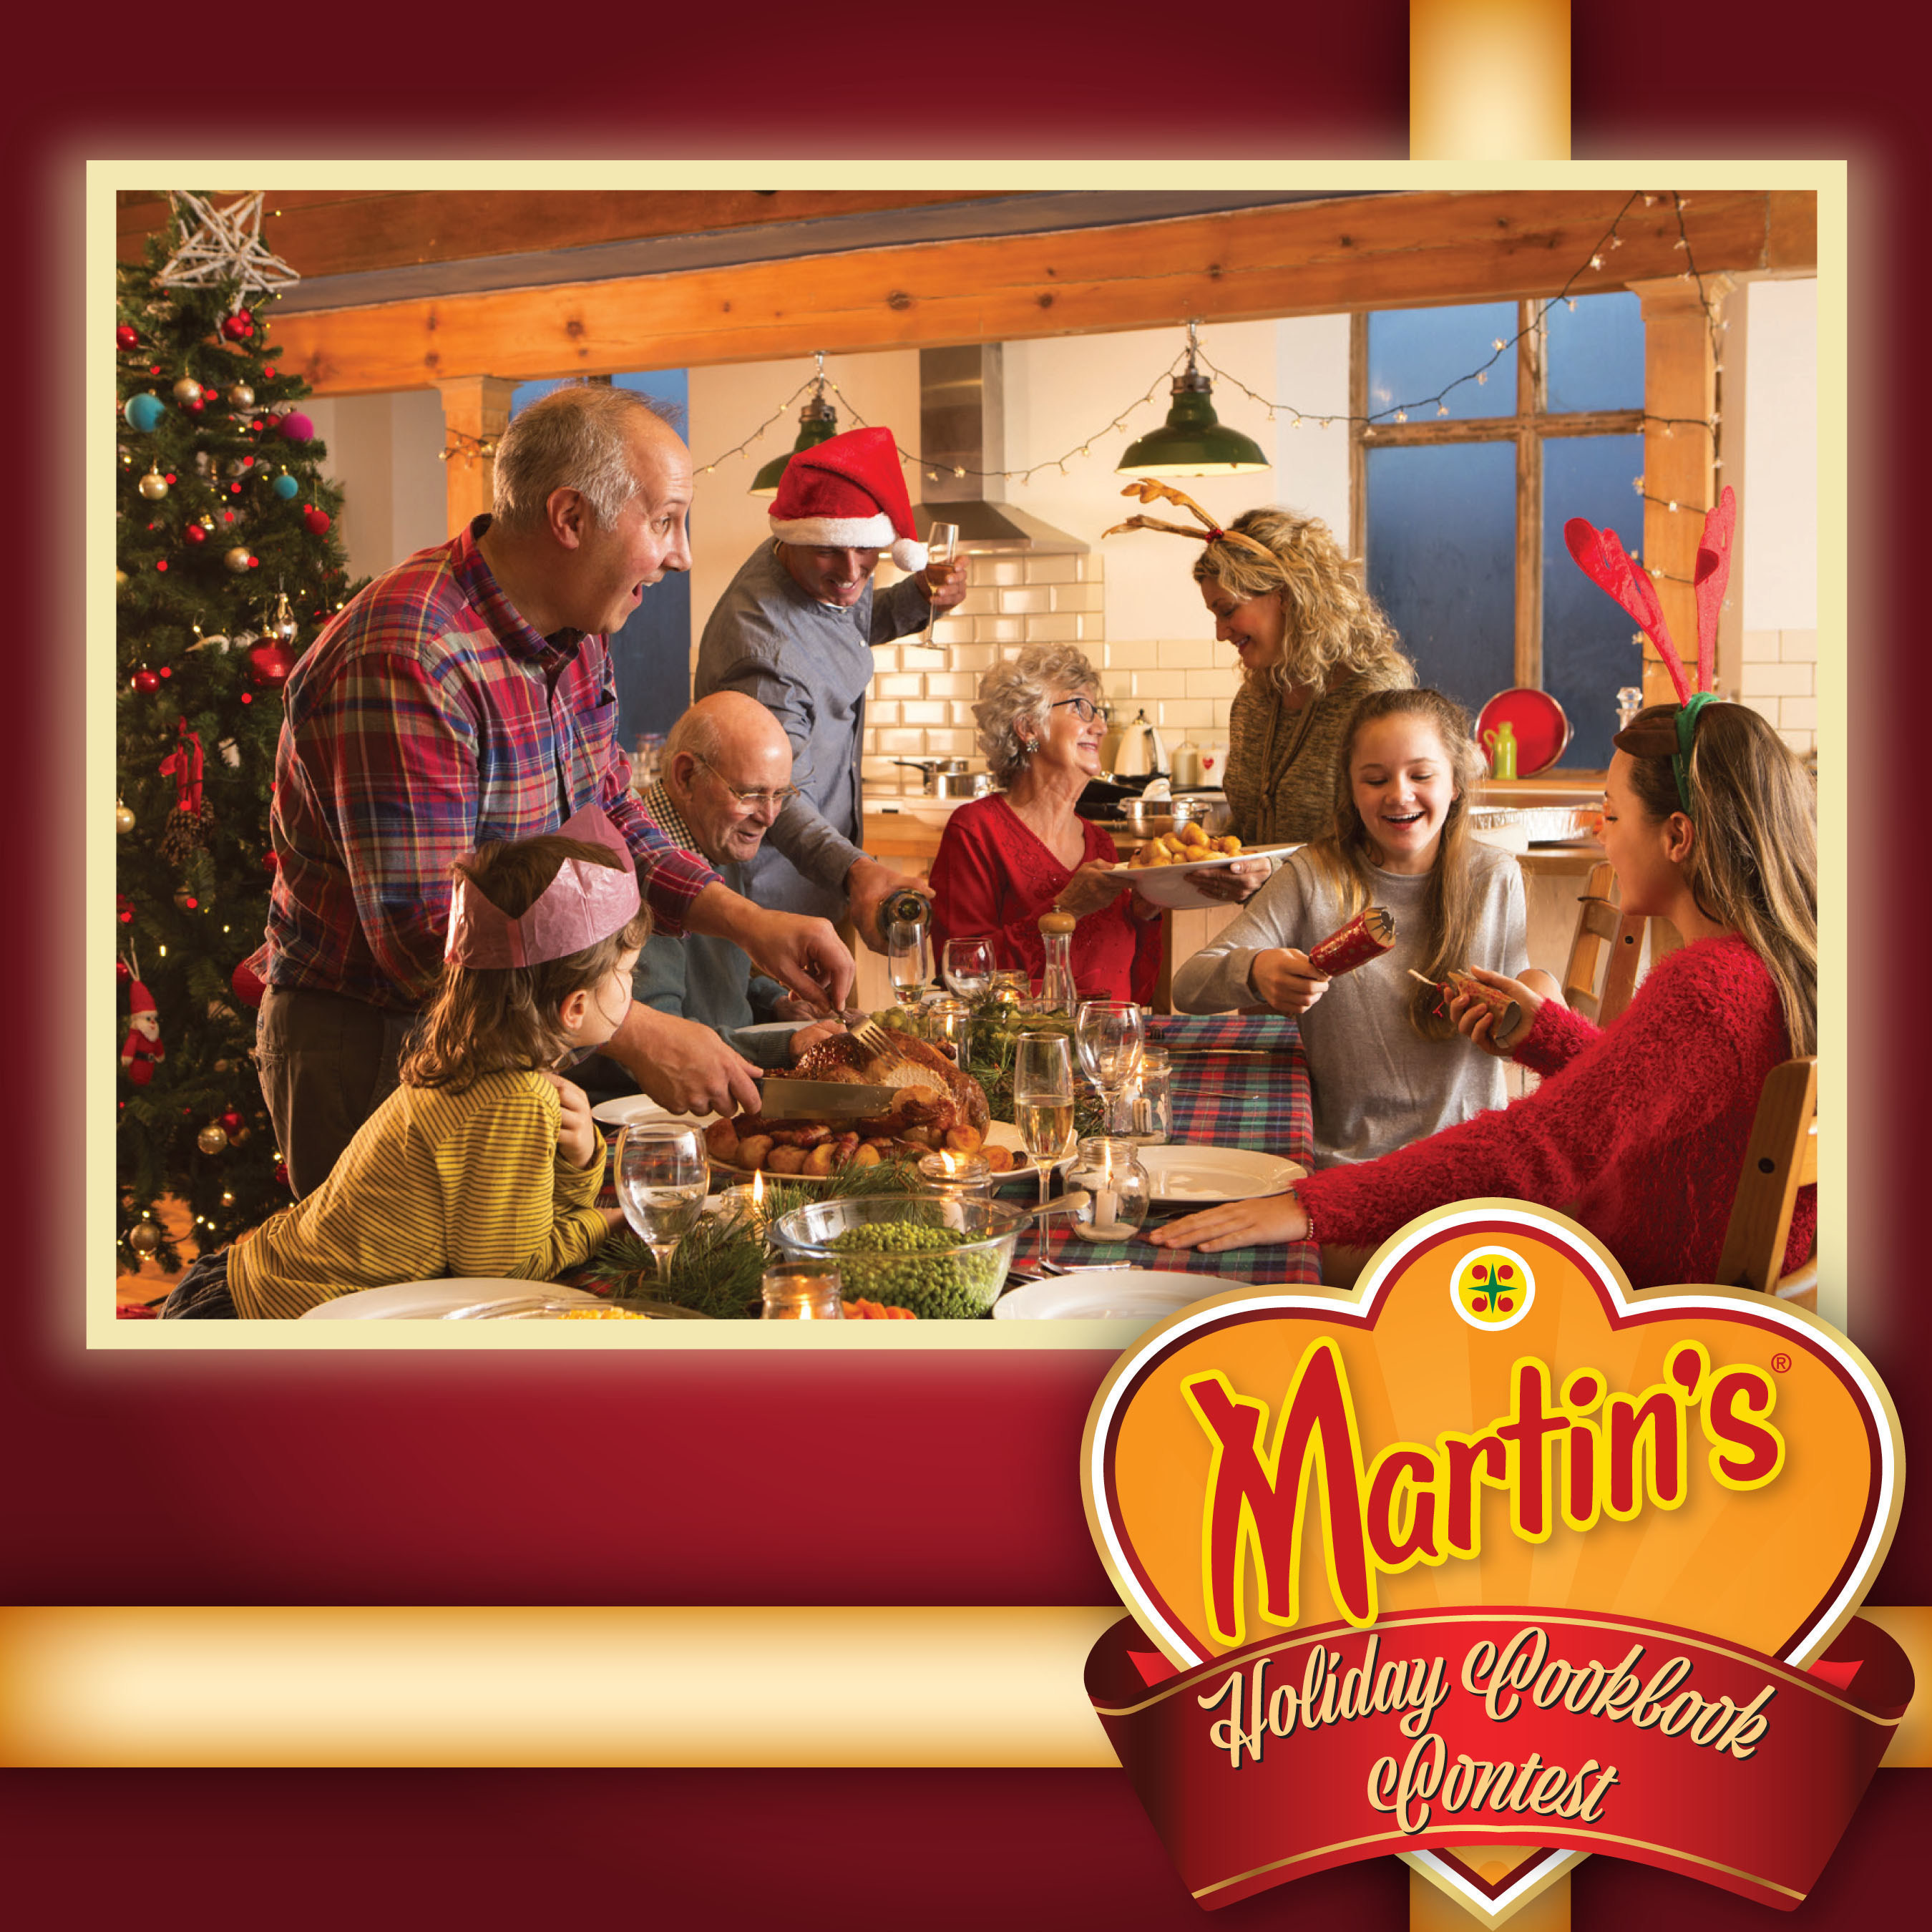 During the months of November and December, Martin's is encouraging participants to submit their favorite holiday recipes to help in the creation of their cookbook, Martin's More than a Meal: Holiday Cookbook.